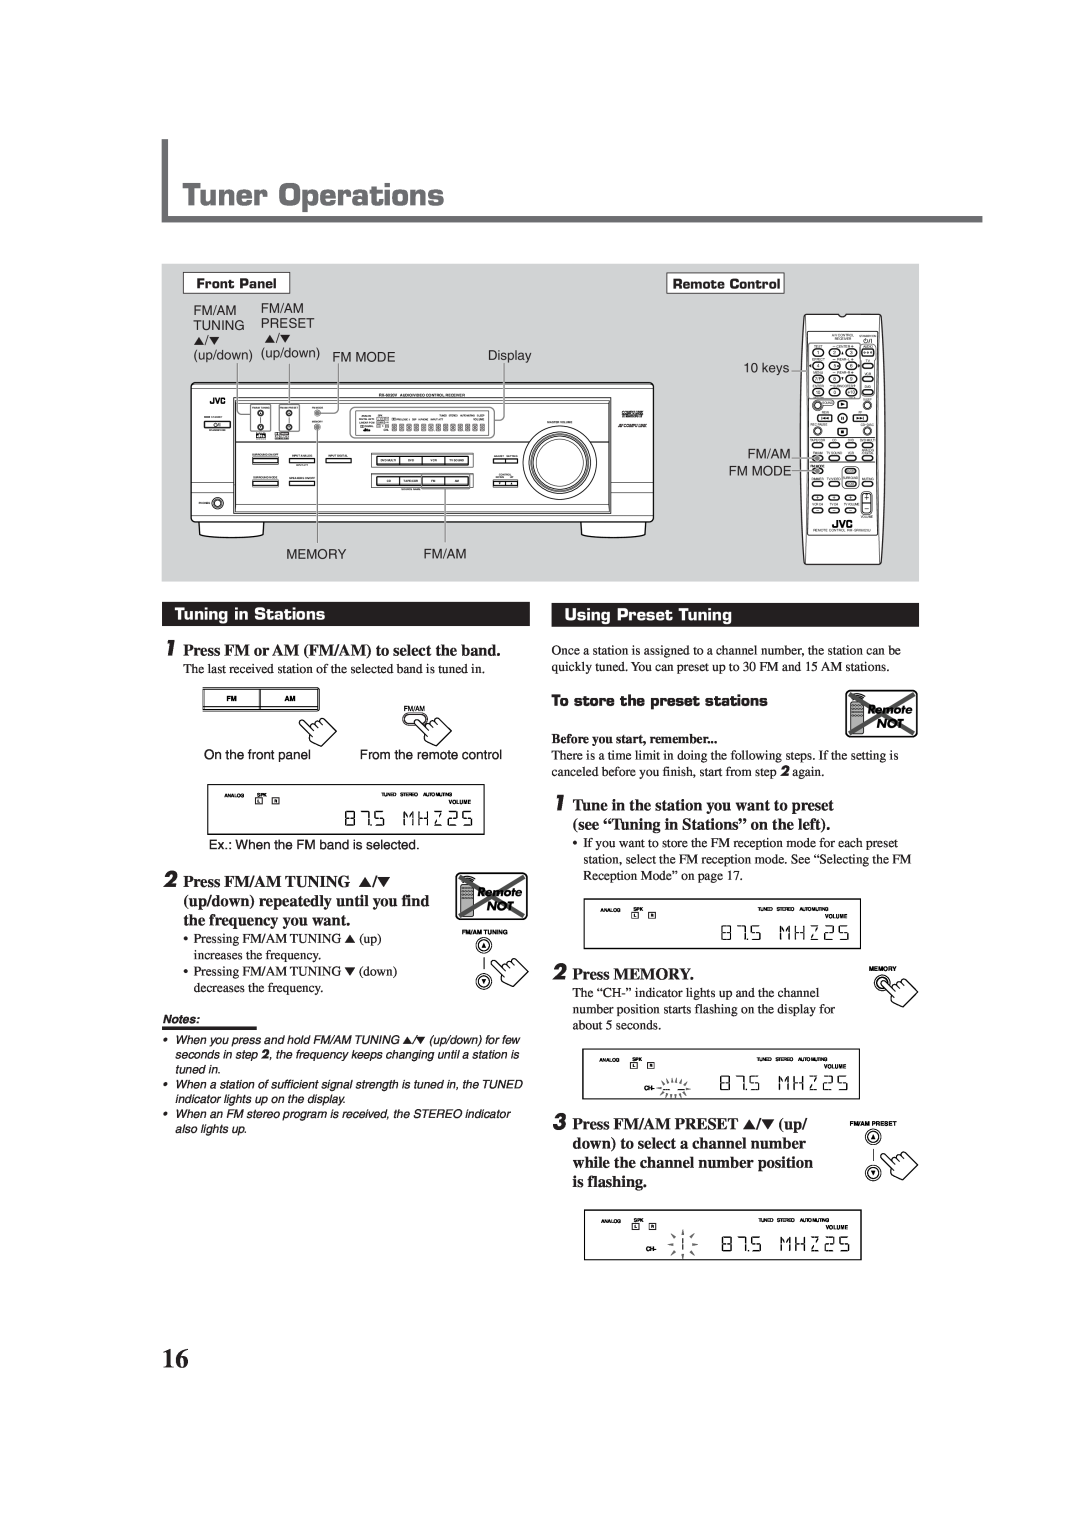 JVC RX-6020VBK manual Tuner Operations, Tuning in Stations, Using Preset Tuning, Tune in the station you want to preset 